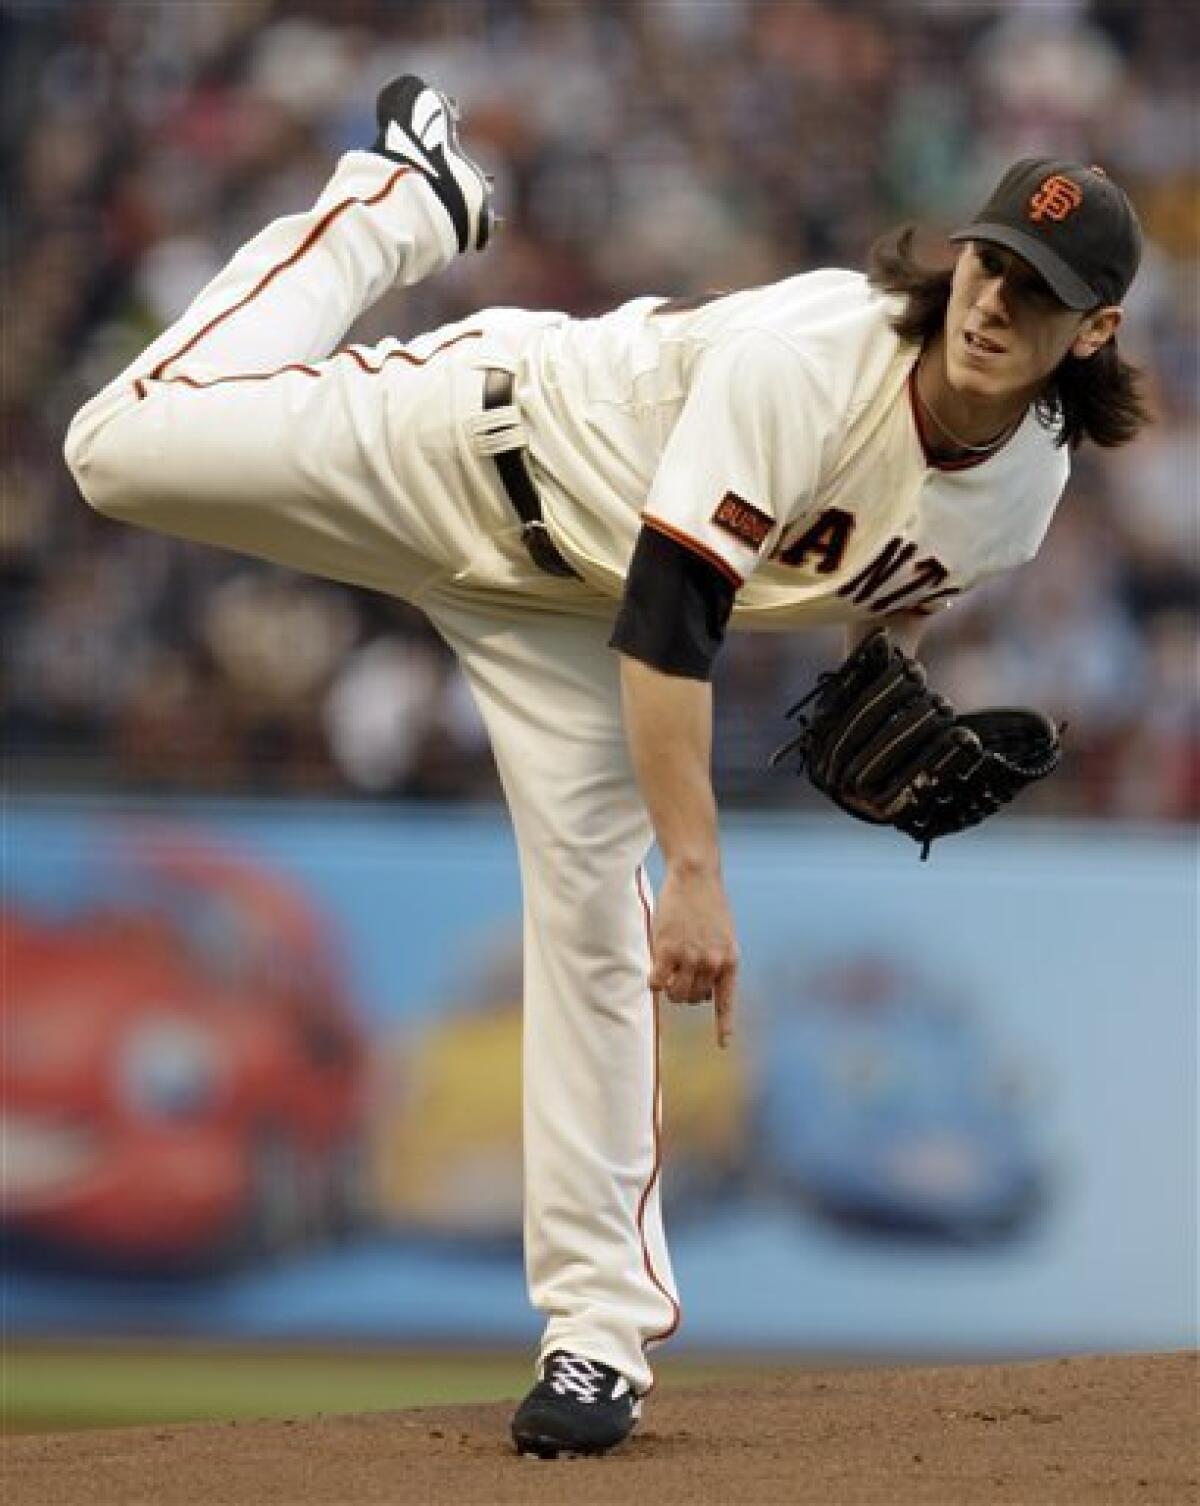 What's next for Tim Lincecum? His season ends in Triple-A